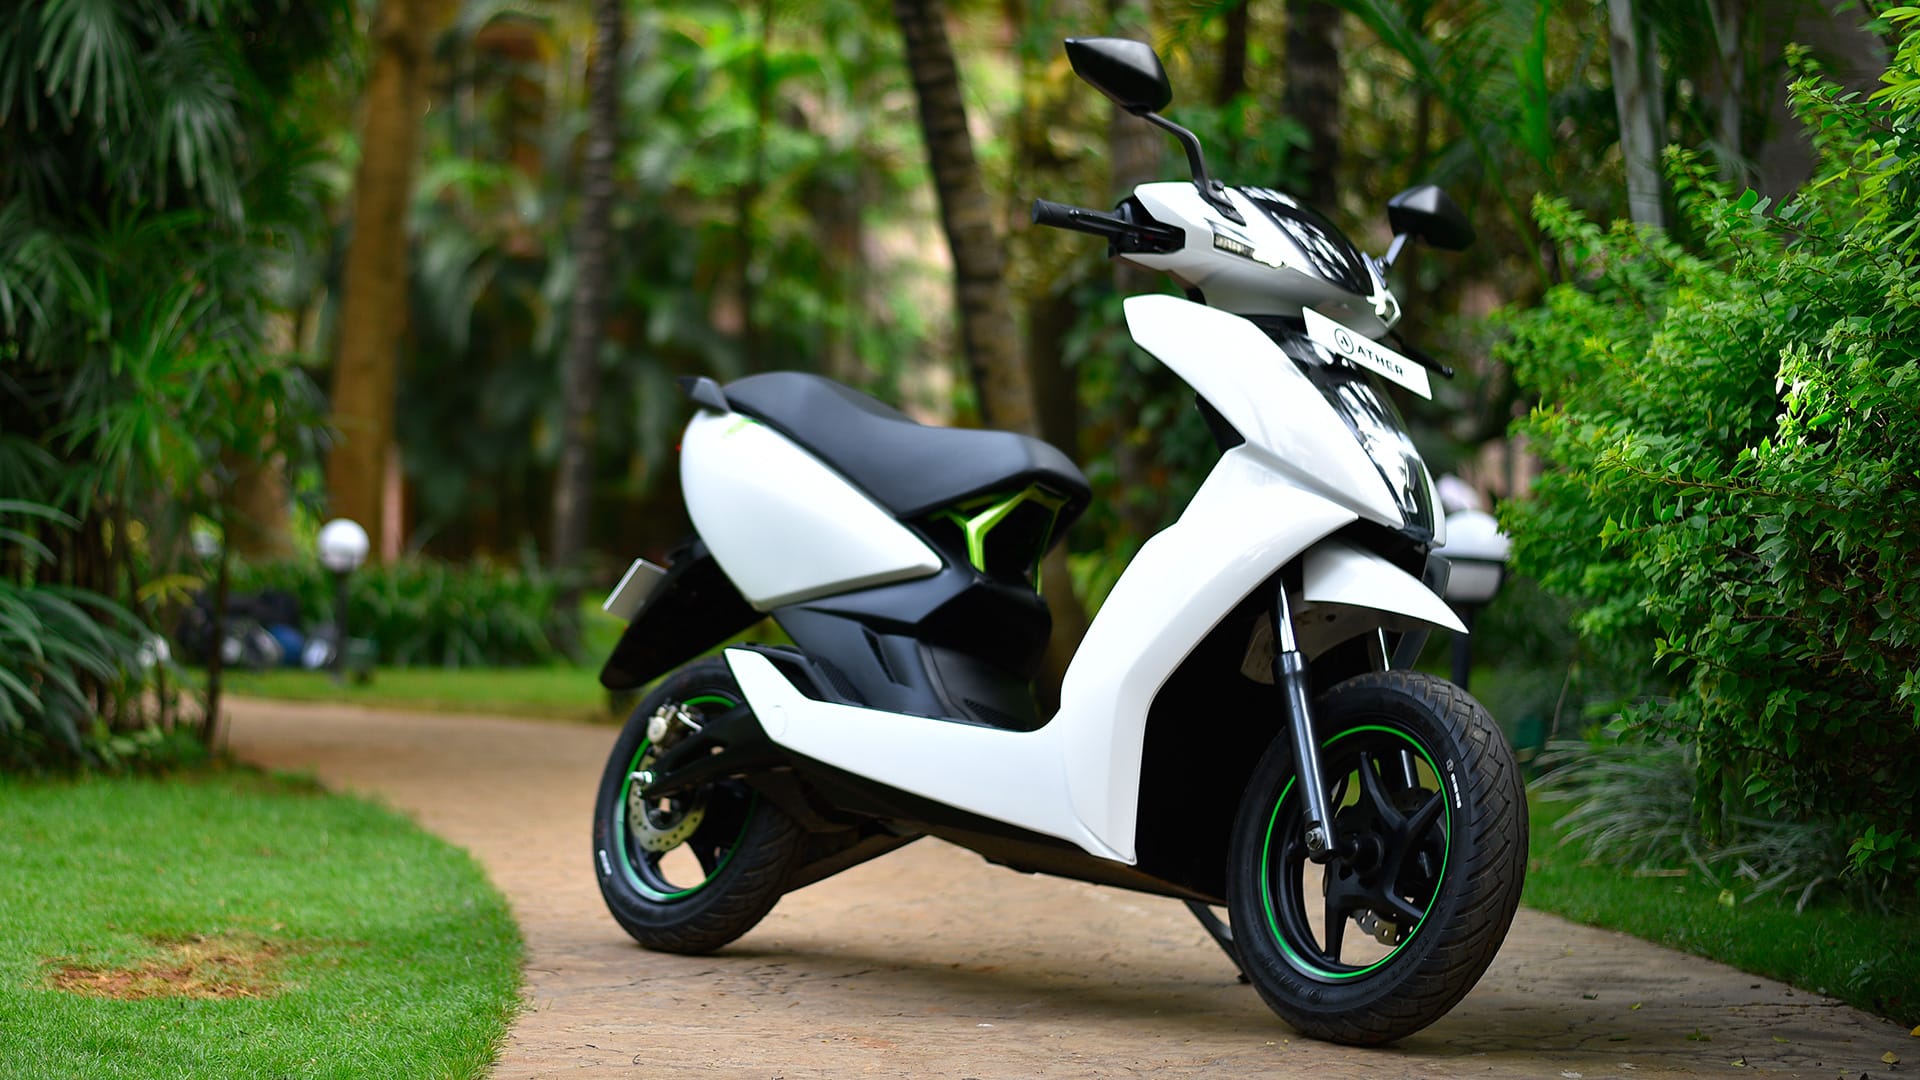 Ather Energy 450 new referral program to benefit existing customers